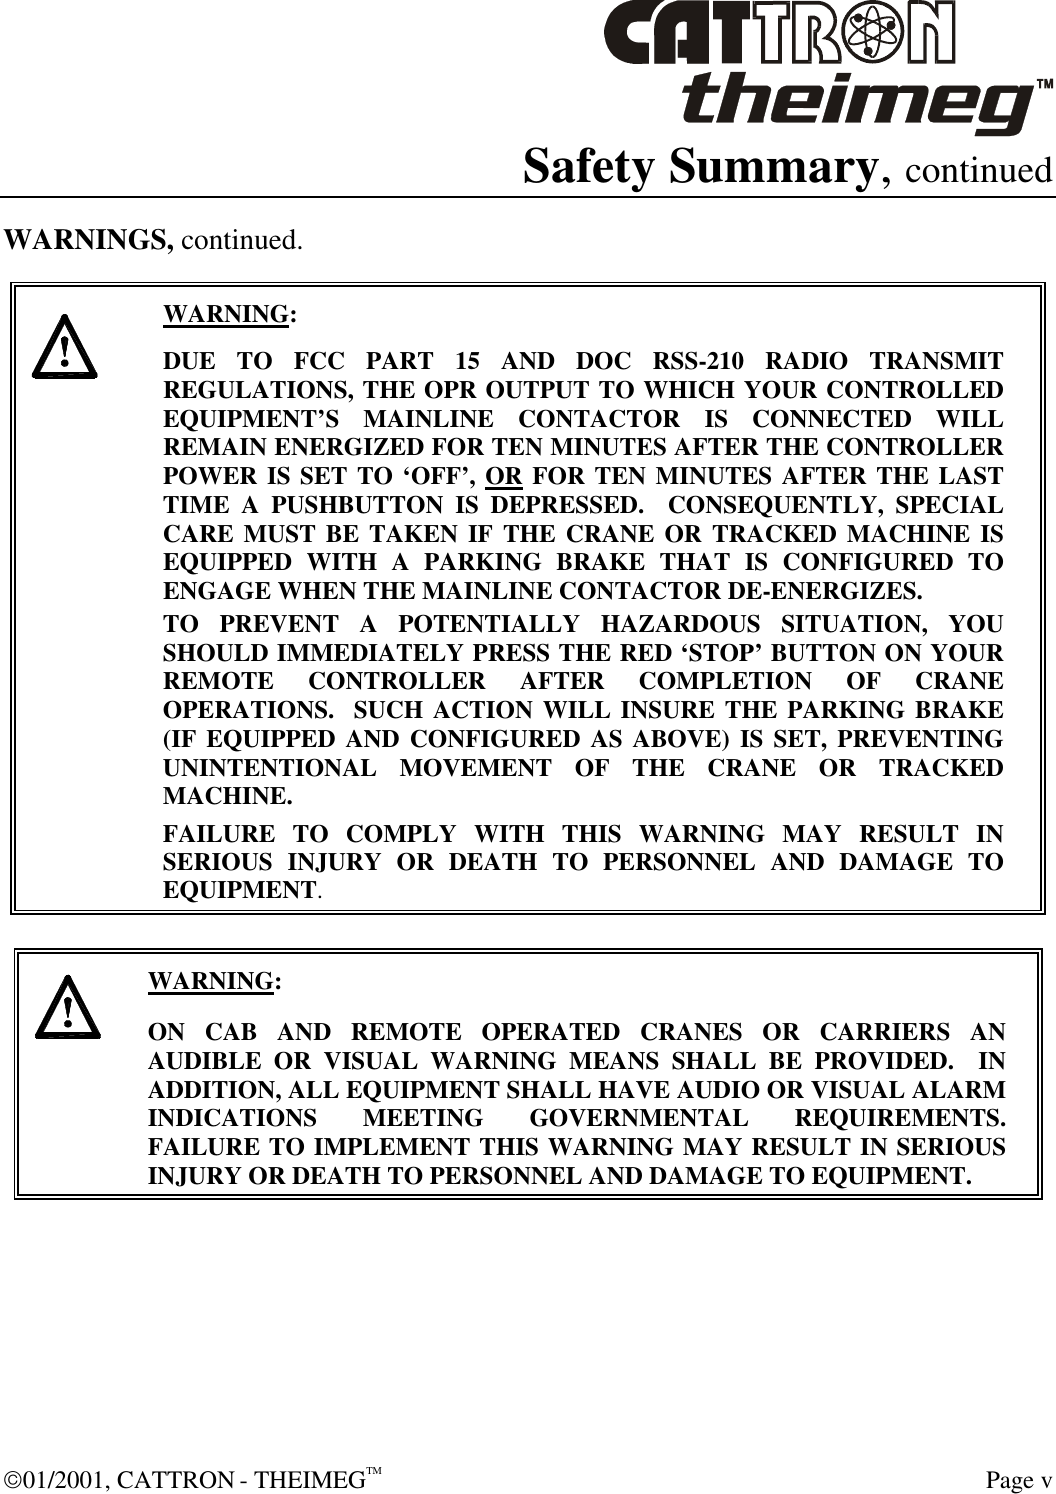  01/2001, CATTRON - THEIMEGTM  Page v Safety Summary, continued WARNINGS, continued.     WARNING: DUE TO FCC PART 15 AND DOC RSS-210 RADIO TRANSMIT REGULATIONS, THE OPR OUTPUT TO WHICH YOUR CONTROLLED EQUIPMENT’S MAINLINE CONTACTOR IS CONNECTED WILL REMAIN ENERGIZED FOR TEN MINUTES AFTER THE CONTROLLER POWER IS SET TO ‘OFF’, OR FOR TEN MINUTES AFTER THE LAST TIME A PUSHBUTTON IS DEPRESSED.  CONSEQUENTLY, SPECIAL CARE MUST BE TAKEN IF THE CRANE OR TRACKED MACHINE IS EQUIPPED WITH A PARKING BRAKE THAT IS CONFIGURED TO ENGAGE WHEN THE MAINLINE CONTACTOR DE-ENERGIZES.    TO PREVENT A POTENTIALLY HAZARDOUS SITUATION, YOU SHOULD IMMEDIATELY PRESS THE RED ‘STOP’ BUTTON ON YOUR REMOTE CONTROLLER AFTER COMPLETION OF CRANE OPERATIONS.  SUCH ACTION WILL INSURE THE PARKING BRAKE (IF EQUIPPED AND CONFIGURED AS ABOVE) IS SET, PREVENTING UNINTENTIONAL MOVEMENT OF THE CRANE OR TRACKED MACHINE. FAILURE TO COMPLY WITH THIS WARNING MAY RESULT IN SERIOUS INJURY OR DEATH TO PERSONNEL AND DAMAGE TO EQUIPMENT.       WARNING: ON CAB AND REMOTE OPERATED CRANES OR CARRIERS AN AUDIBLE OR VISUAL WARNING MEANS SHALL BE PROVIDED.  IN ADDITION, ALL EQUIPMENT SHALL HAVE AUDIO OR VISUAL ALARM INDICATIONS MEETING GOVERNMENTAL REQUIREMENTS. FAILURE TO IMPLEMENT THIS WARNING MAY RESULT IN SERIOUS INJURY OR DEATH TO PERSONNEL AND DAMAGE TO EQUIPMENT.   